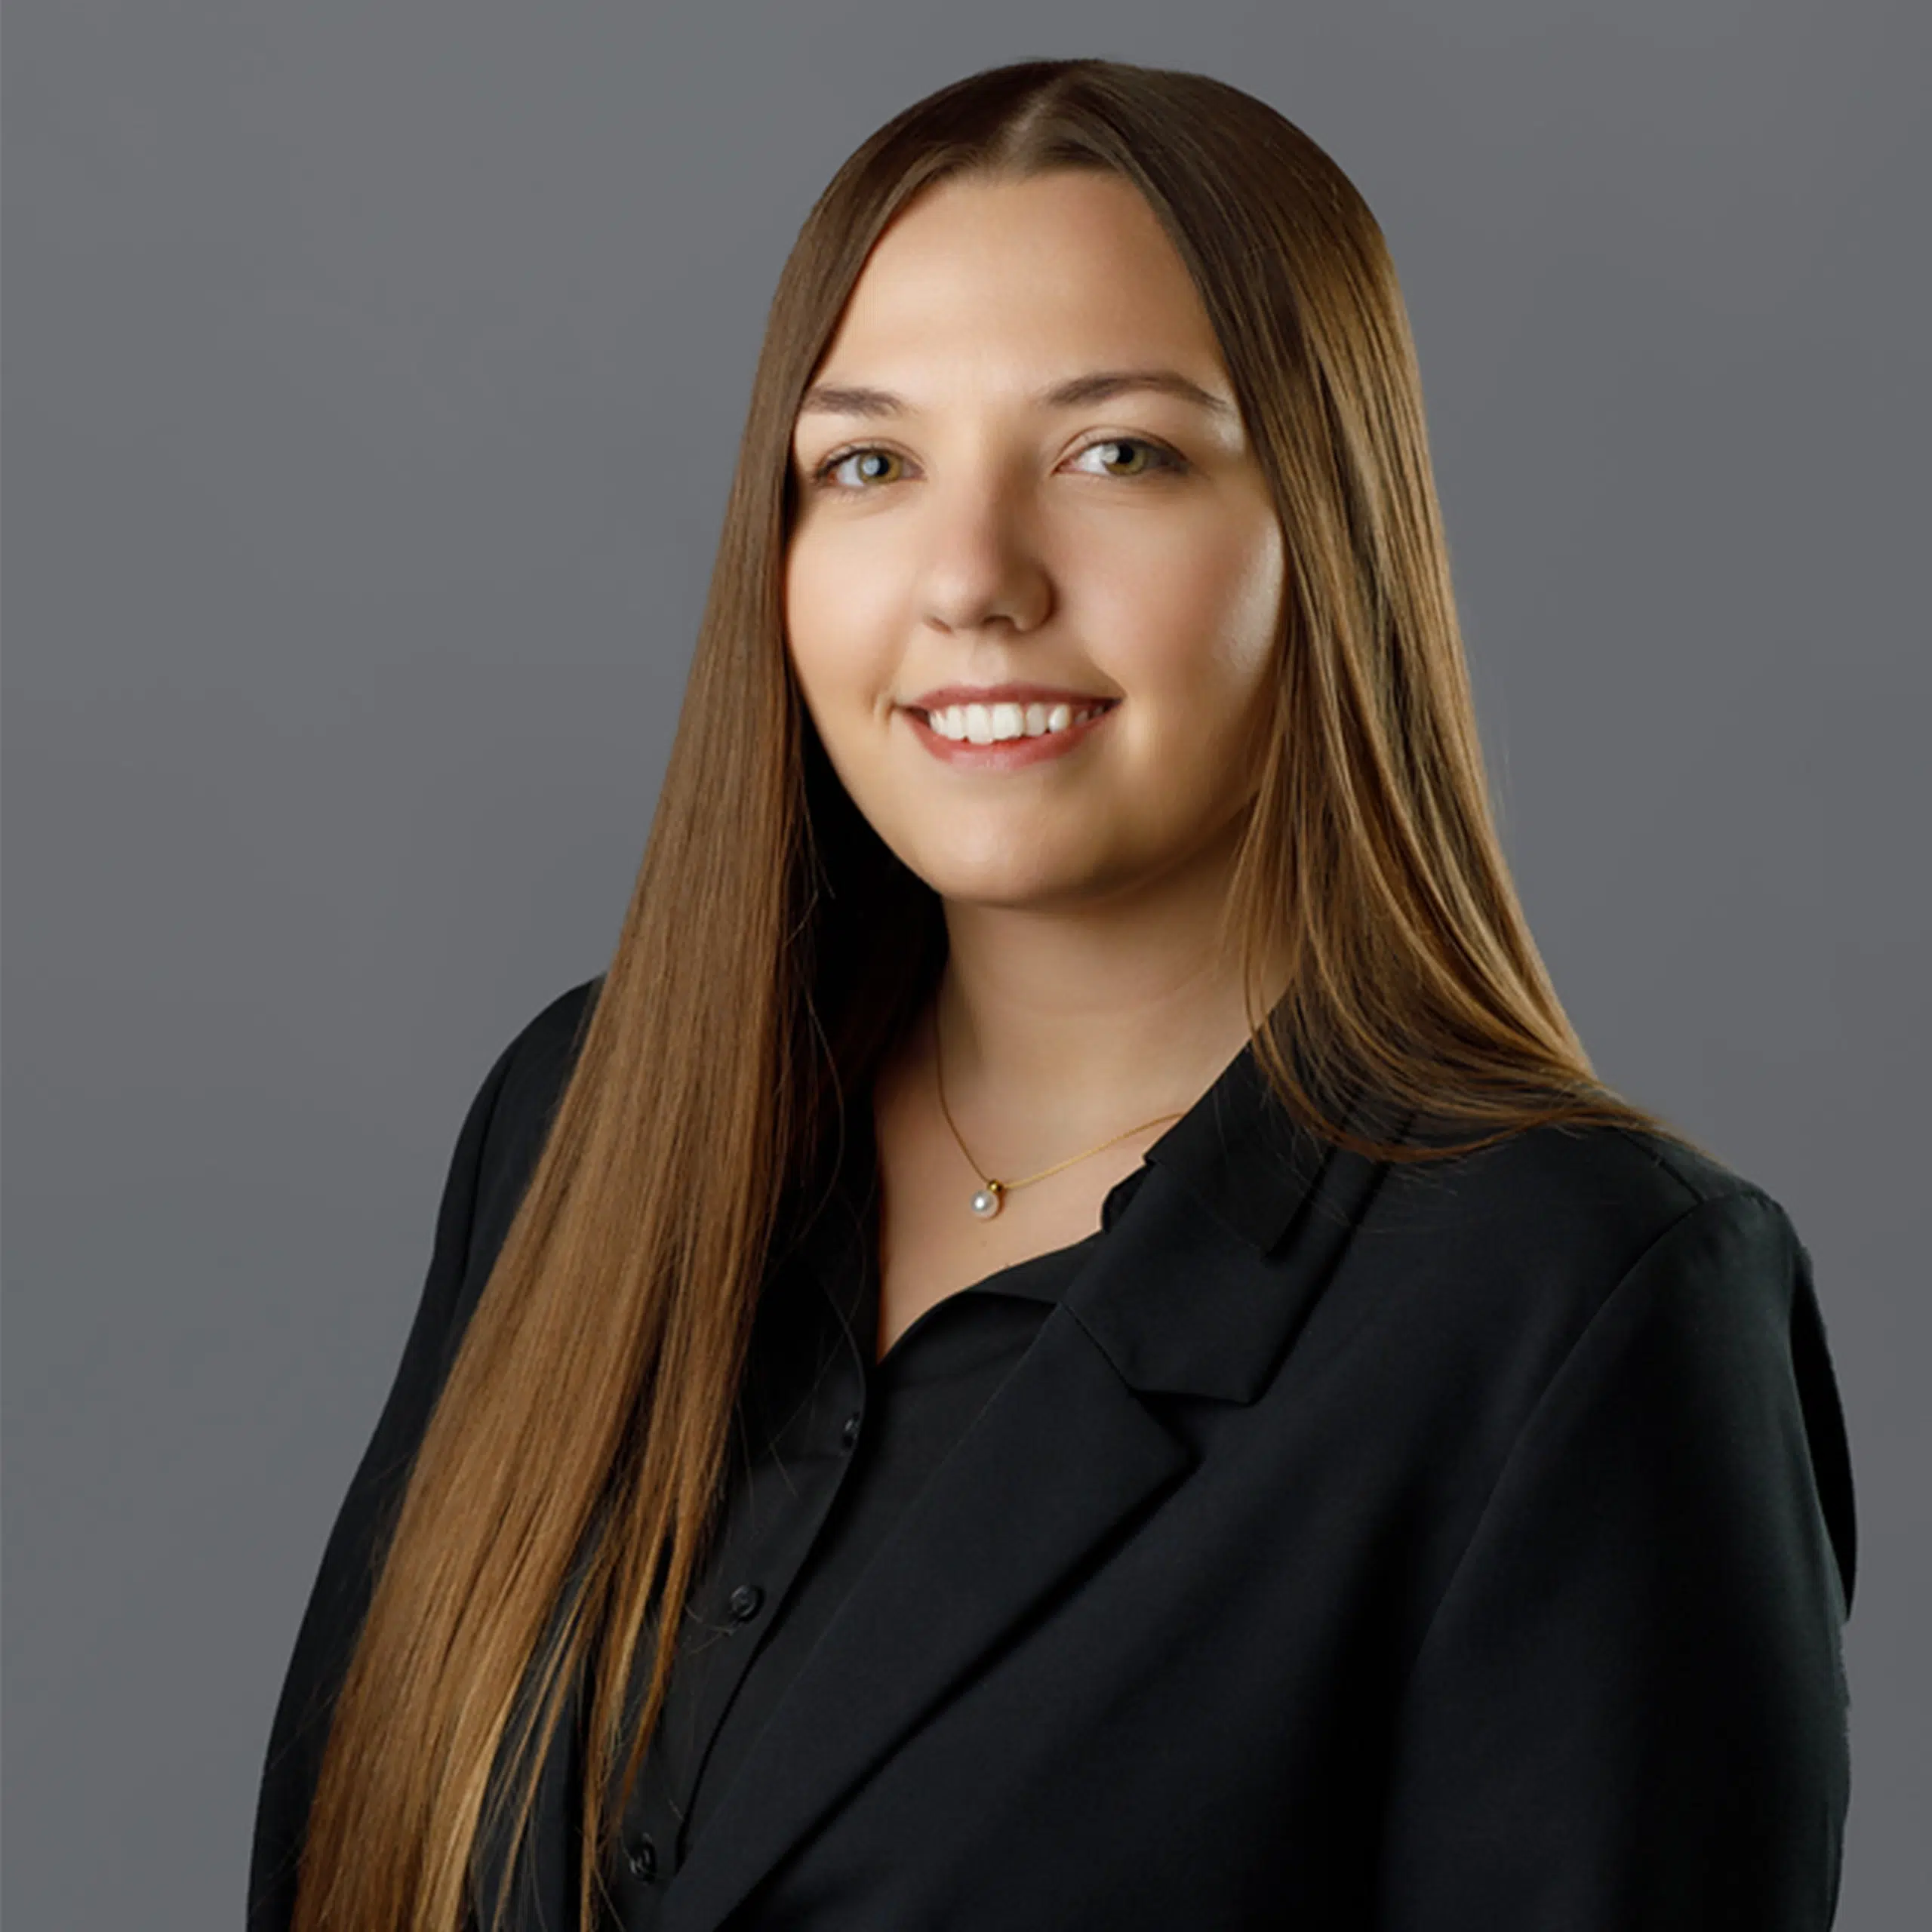 Haley Turk smiling in a suit coat with a grey background